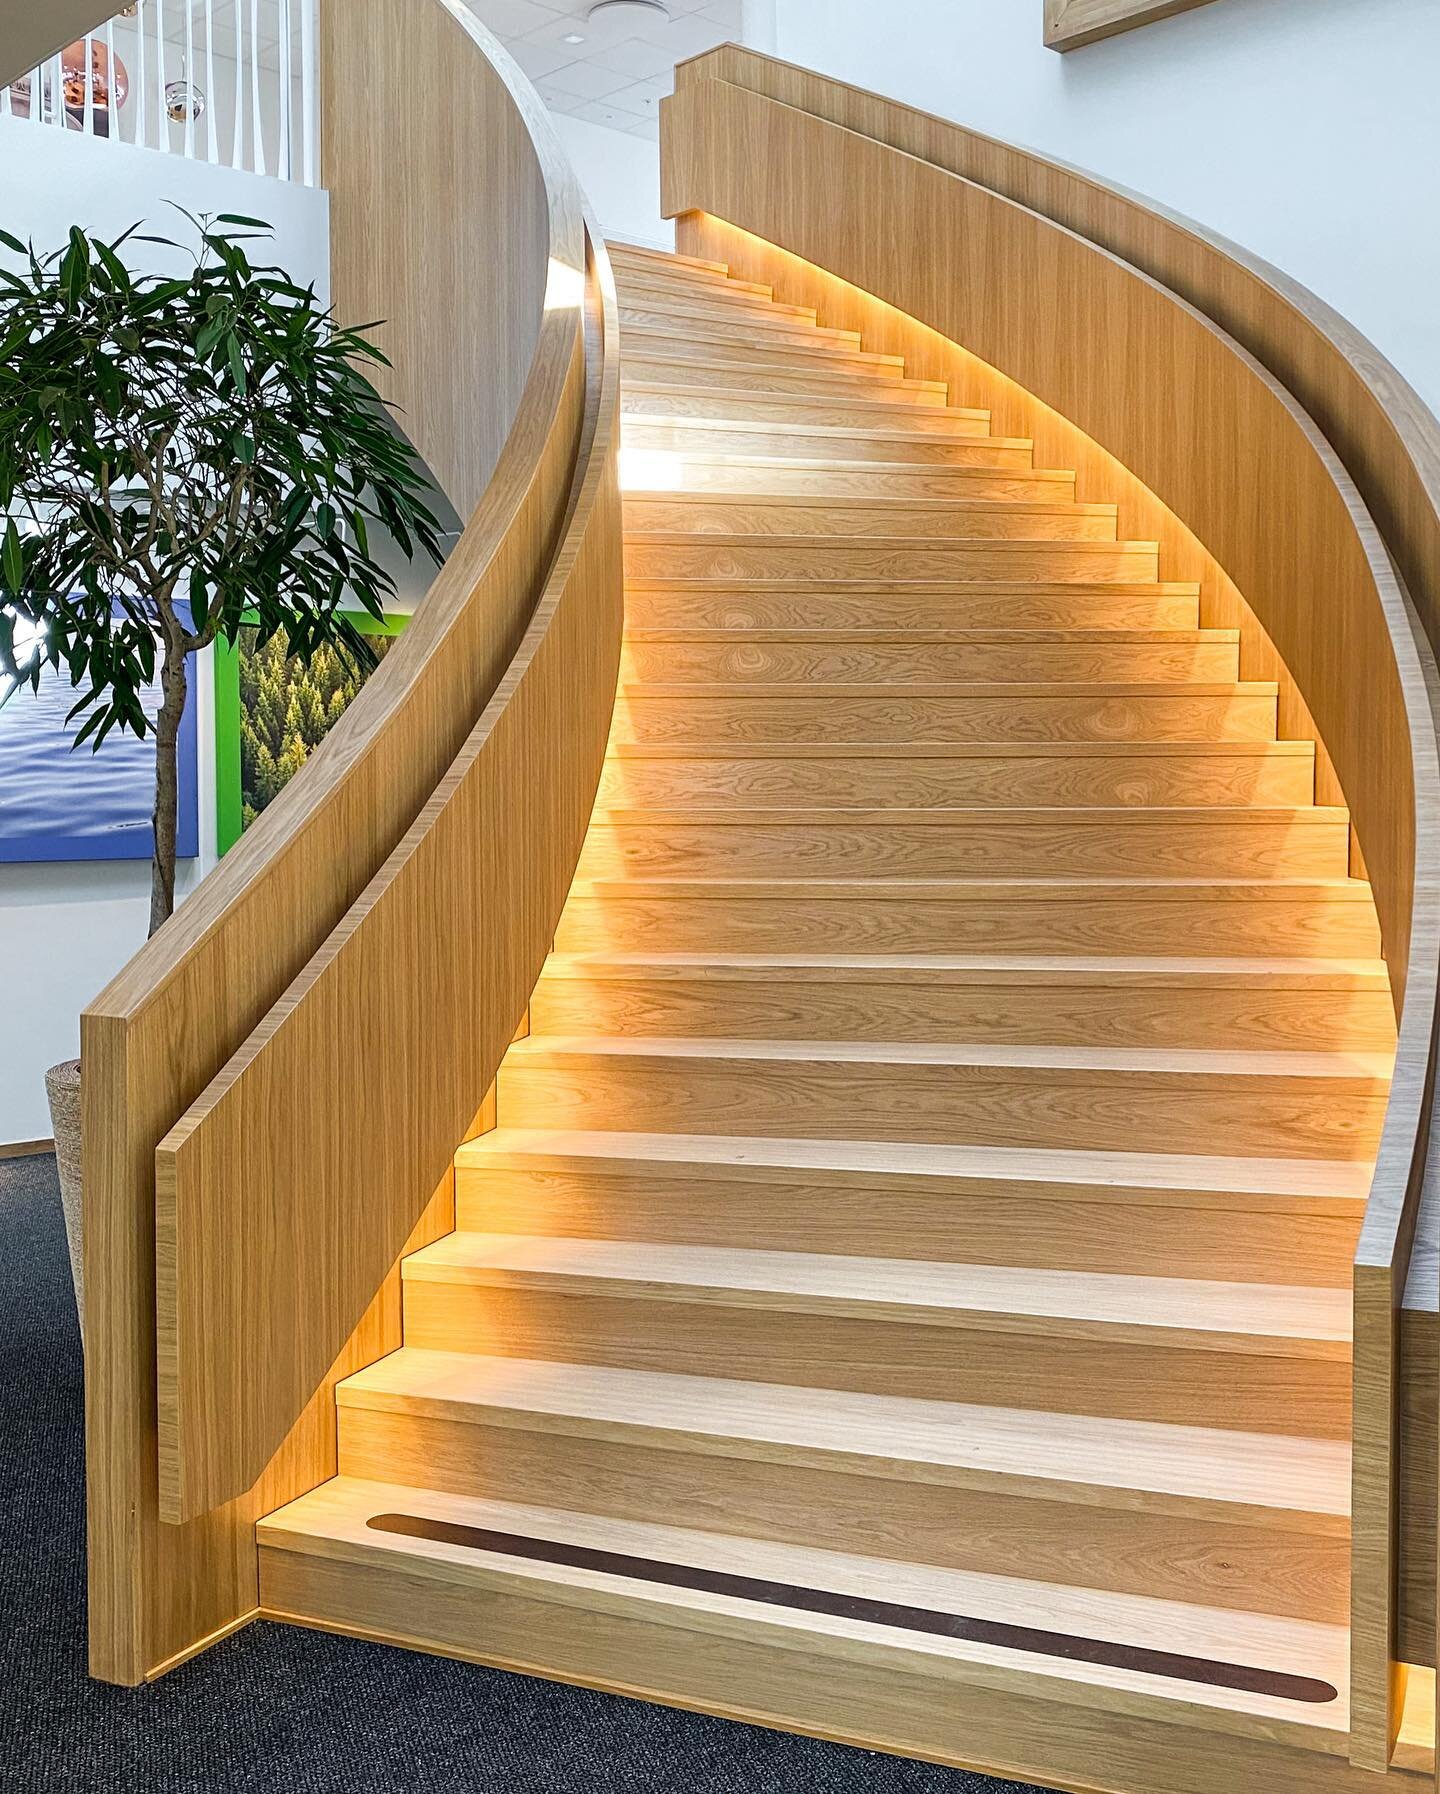 Real estate giants 3HUS @fastighetsab3hus and BAB bygg AB @babbygg2018 asked for stairs with unique looks and we answered with these two beauties. Two curved steel staircase structures finished all around with oak wood and LED lighting on every step.